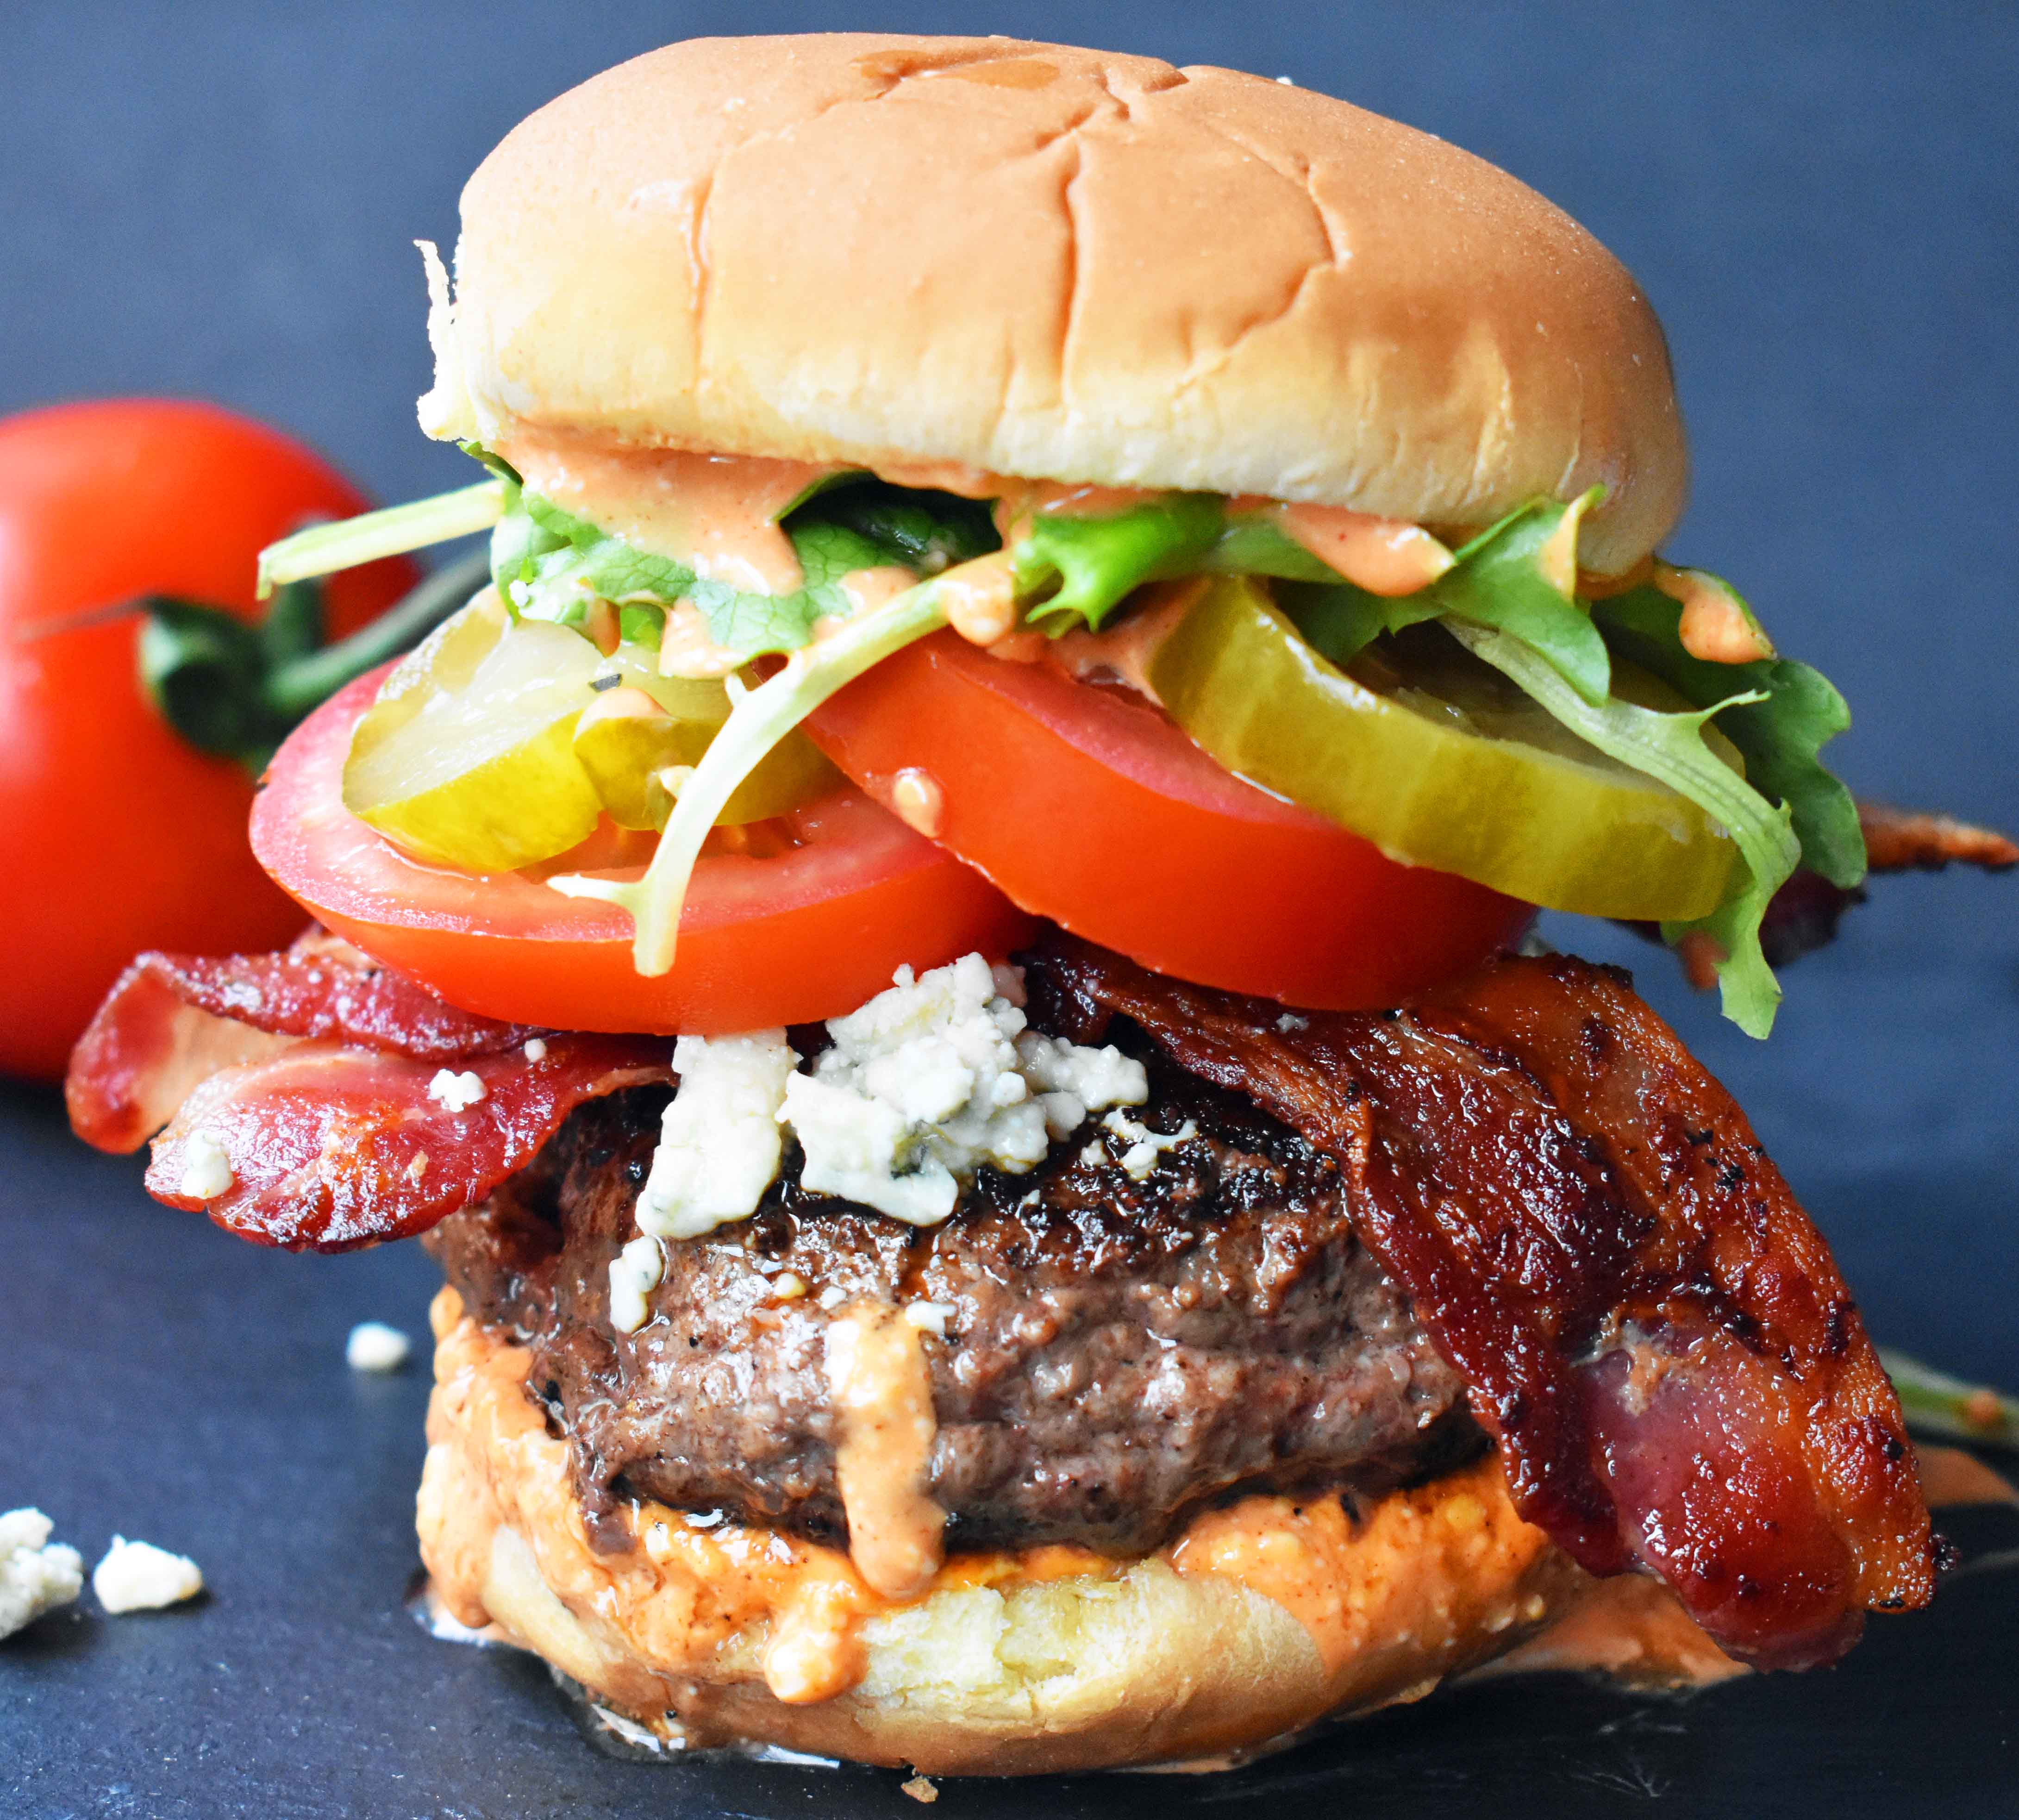 Dragonslayer Burger. Beef with blue cheese, crispy bacon, juicy tomatoes, crunchy pickles, spring mix, and buffalo ranch sauce. www.modernhoney.com